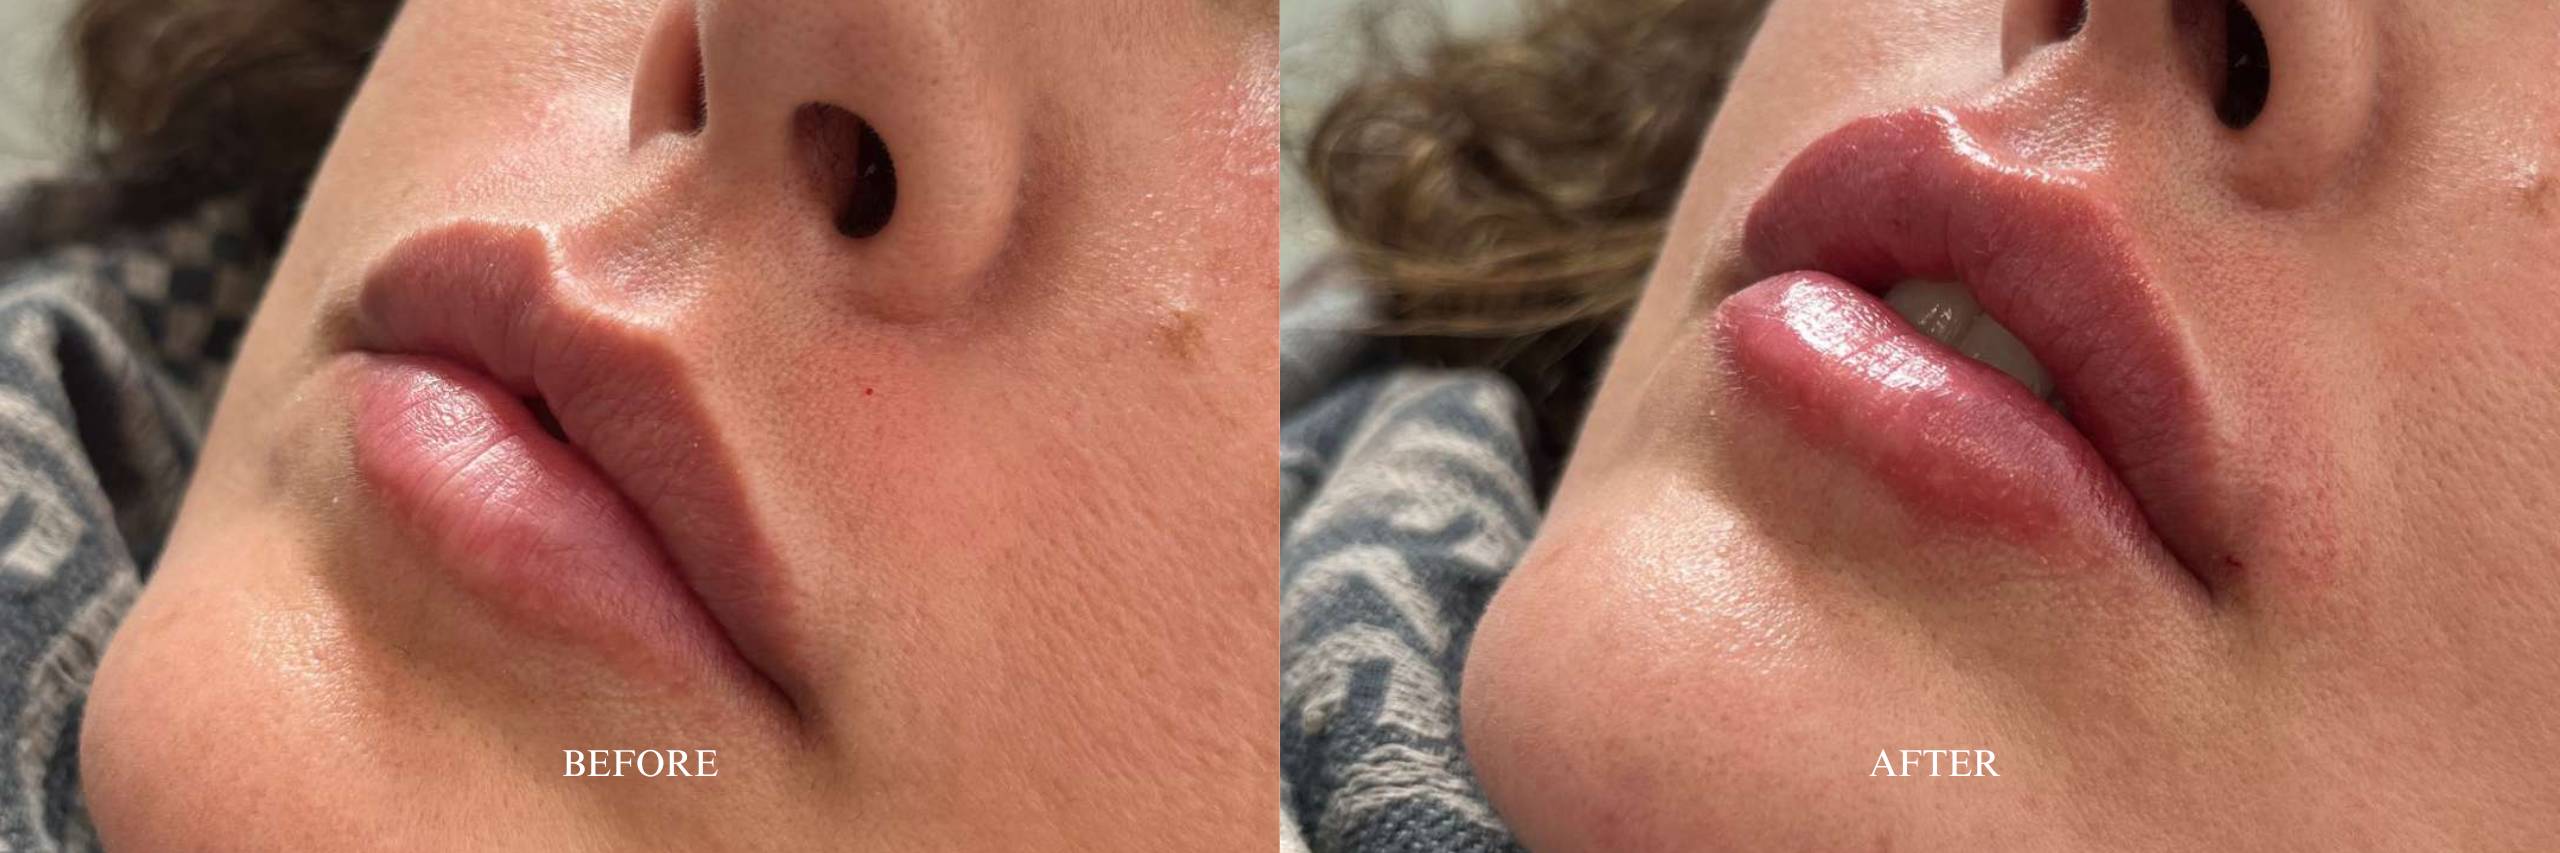 Lip Filler 2 Before and After